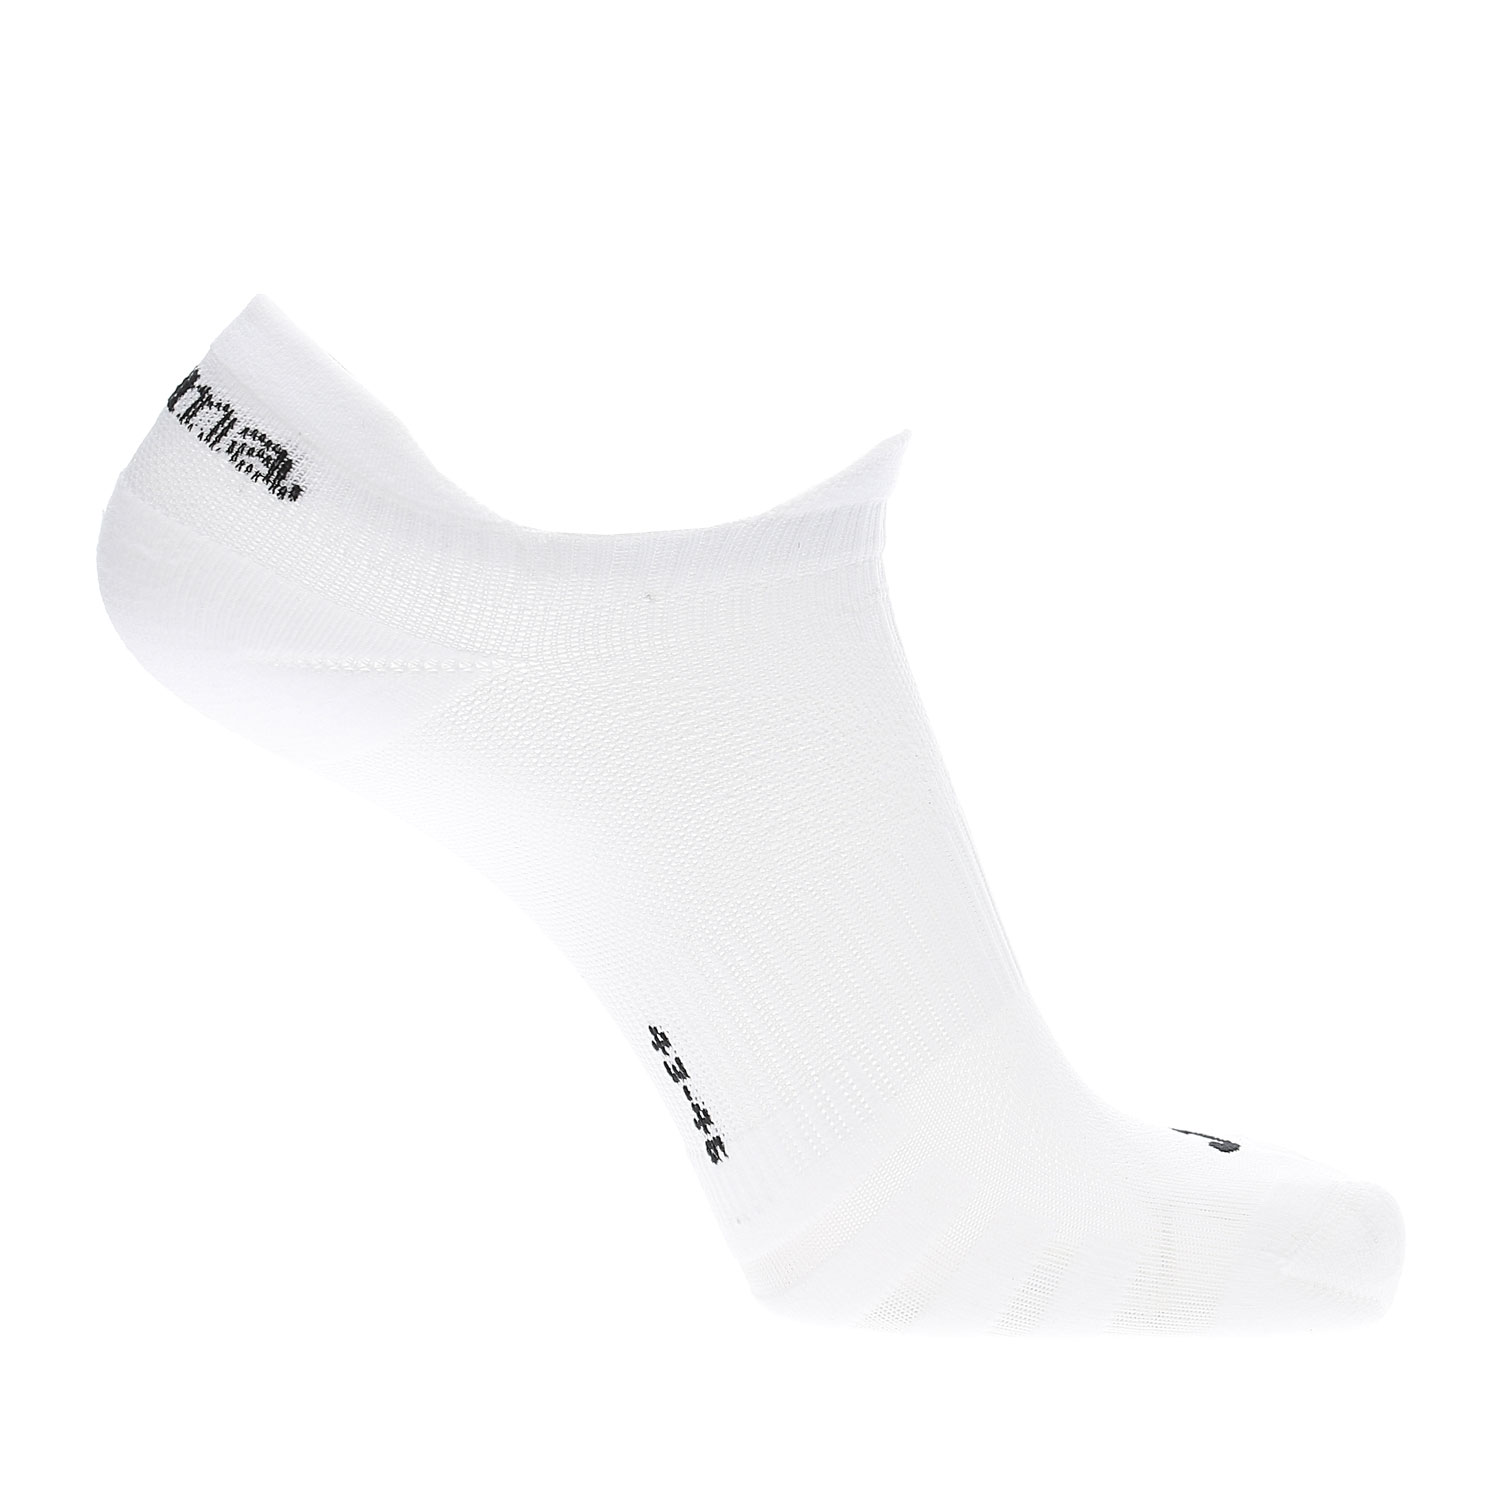 Joma Performance Calcetines - White